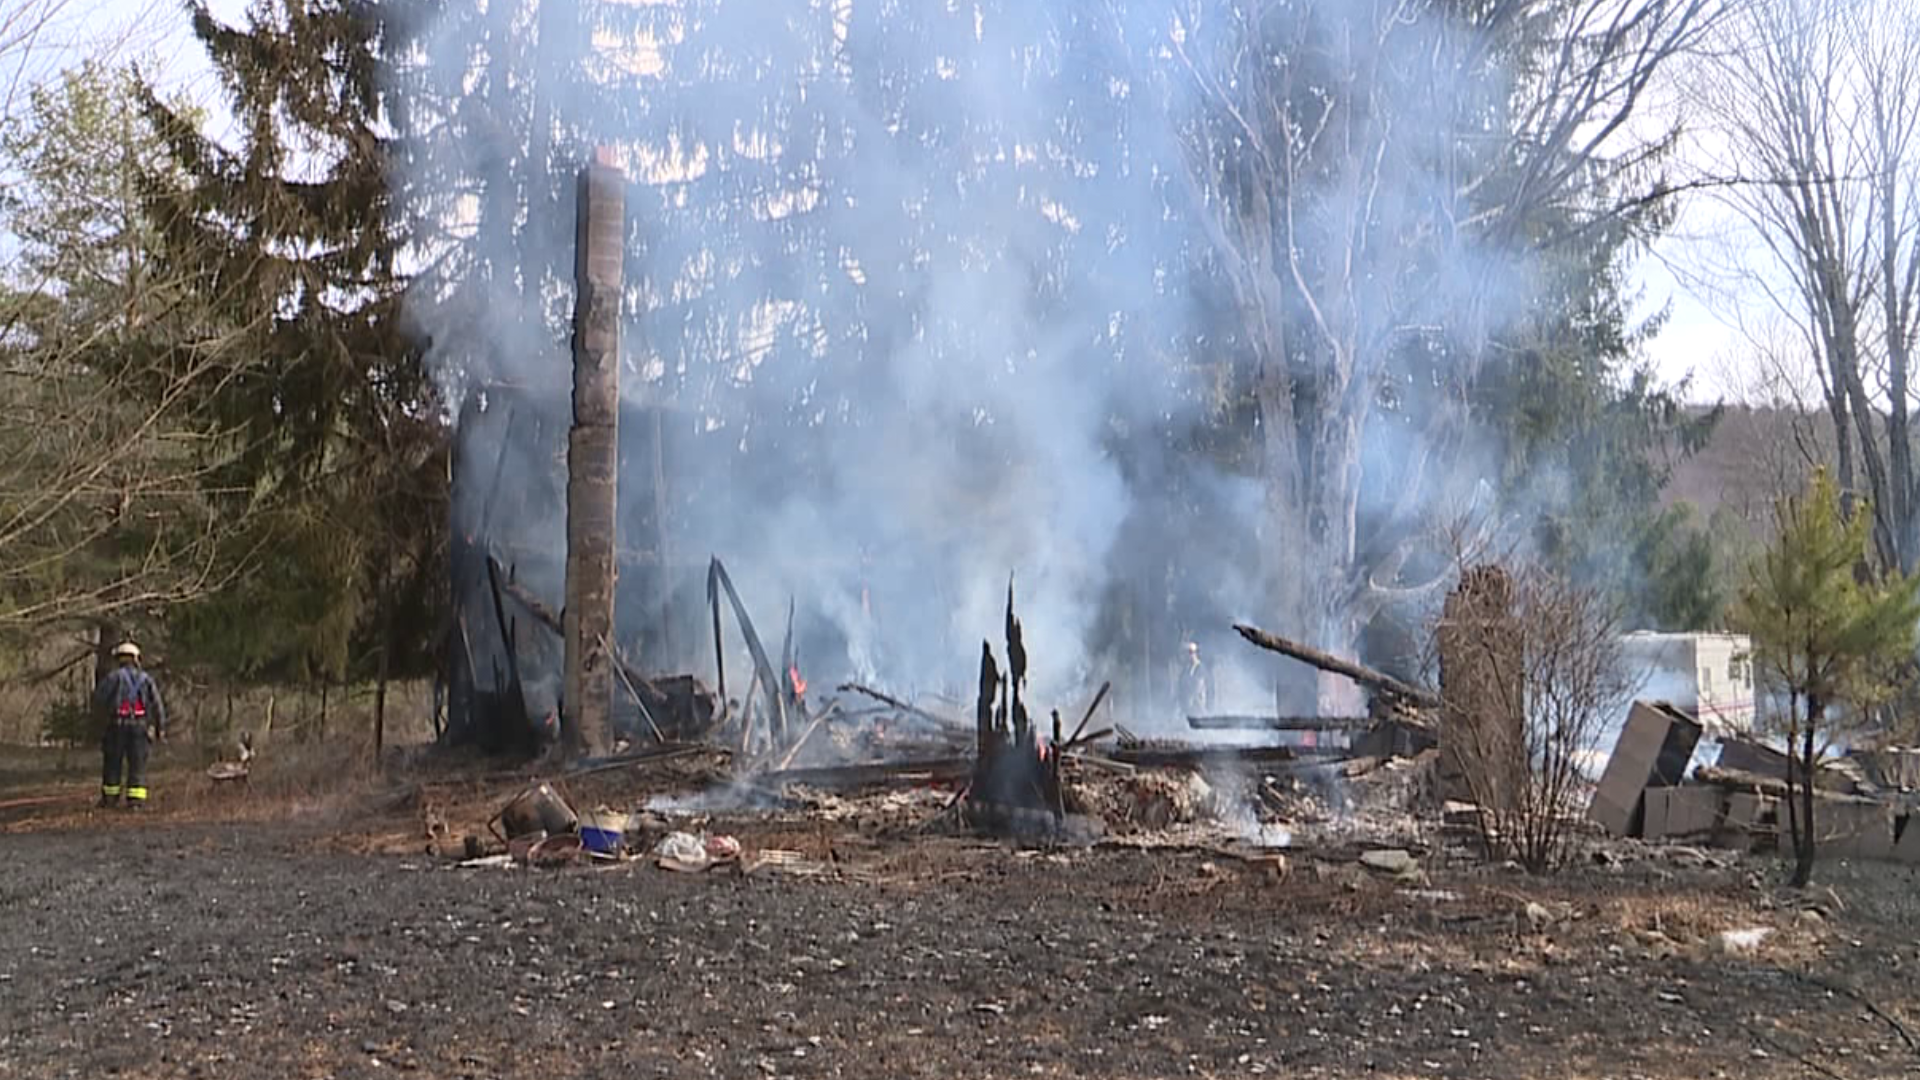 The fire sparked at the place in Buck Township.